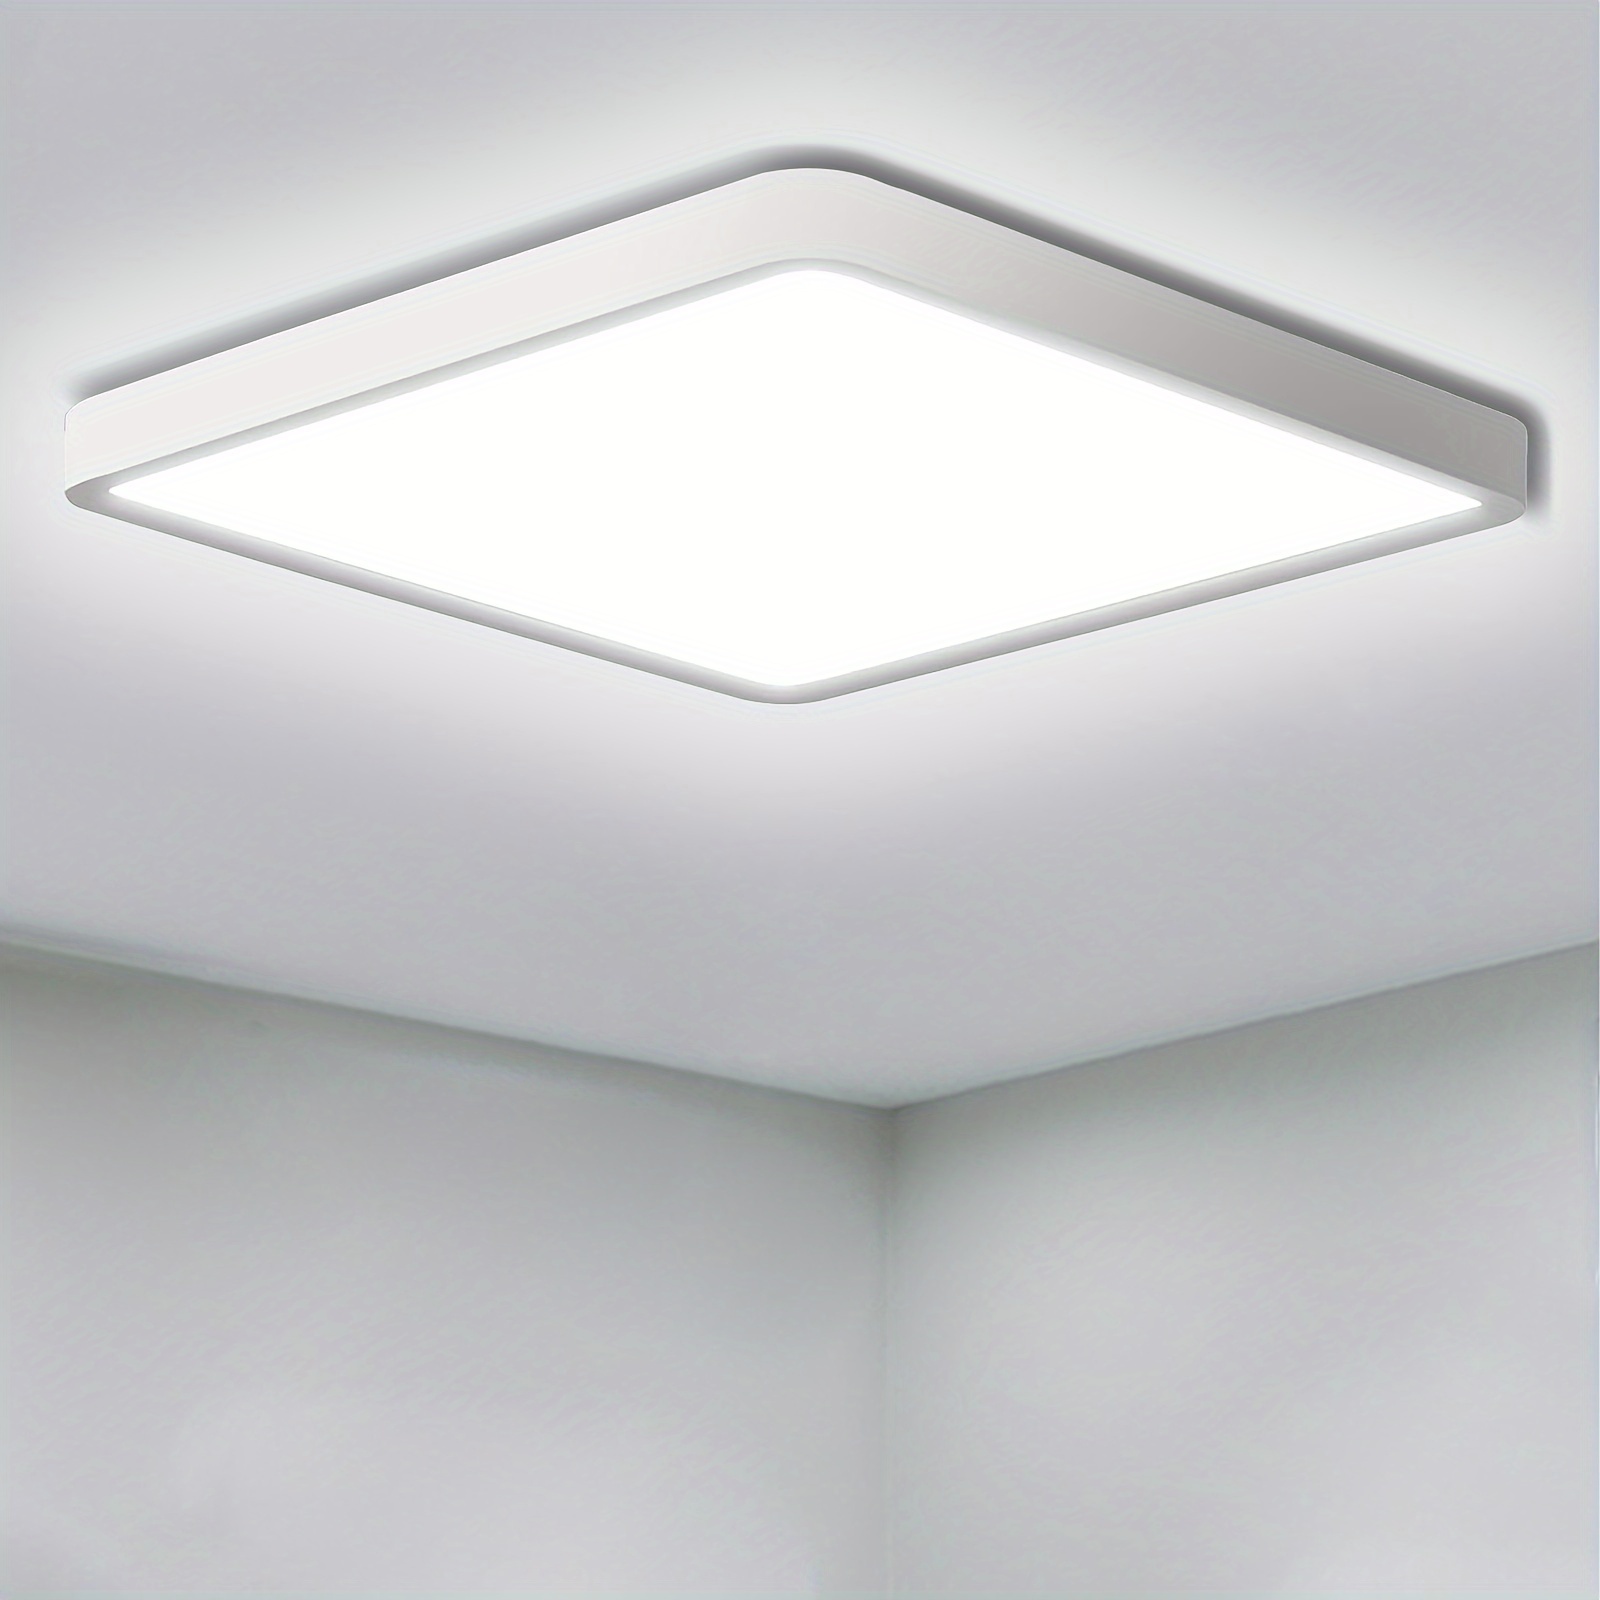 

1pc Recessed Led Ceiling Light Fixture, 5000k Neutral White, 9inch 24w Ceiling Light, Ultra Thin Recessed Square Ceiling Light For Kitchen, Bedroom, Basement, Hallway, Living Room, Stairway